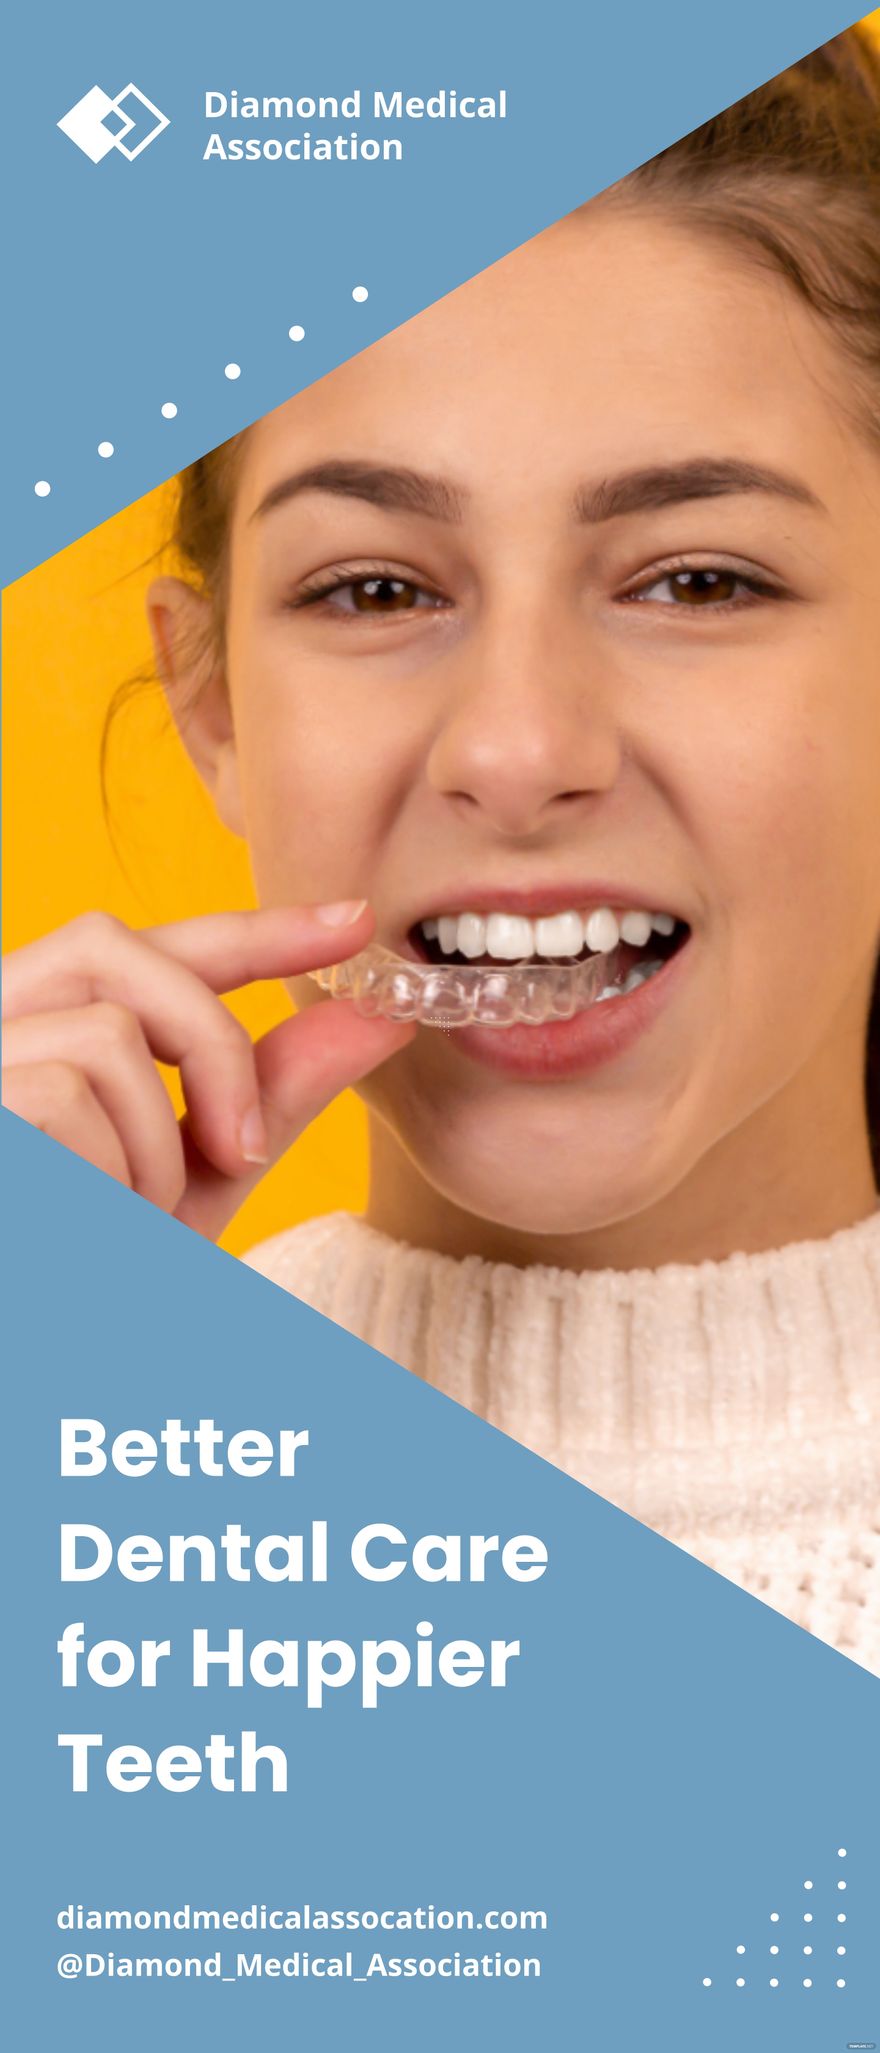 Free Simple Dental Roll Up Banner Template